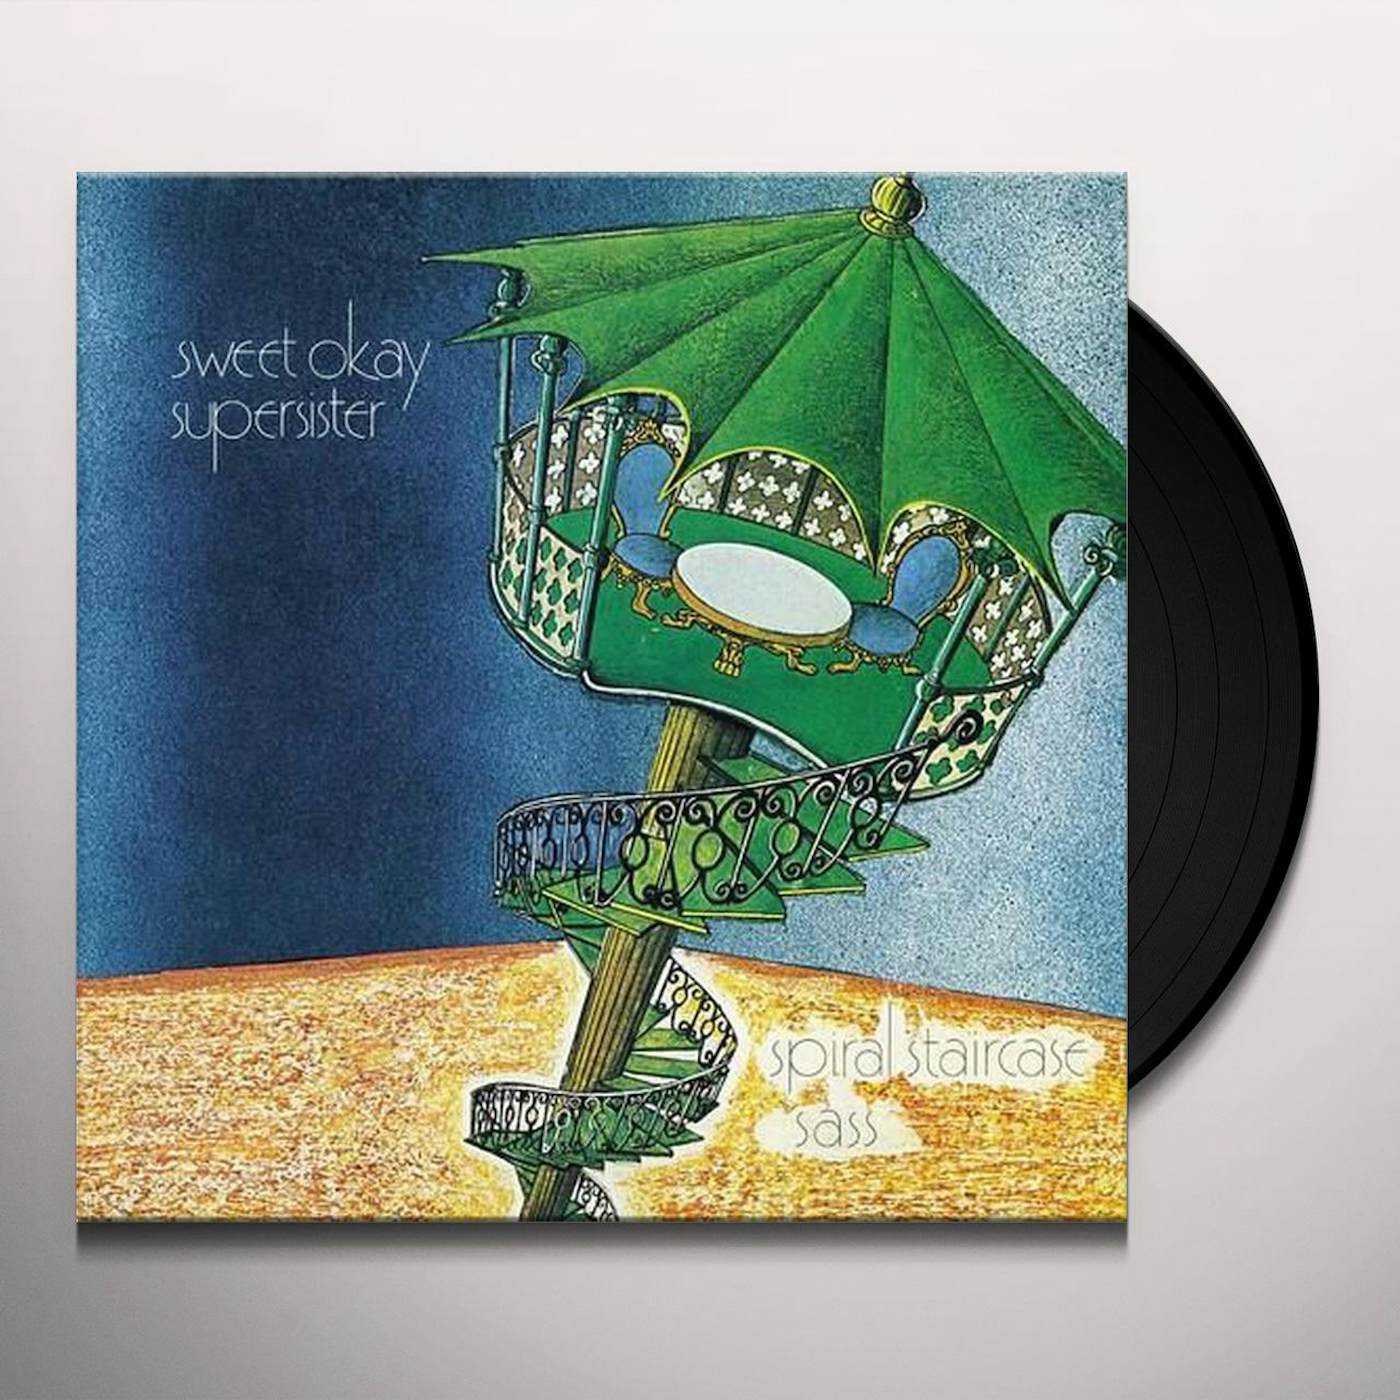 Supersister Spiral Staircase Vinyl Record